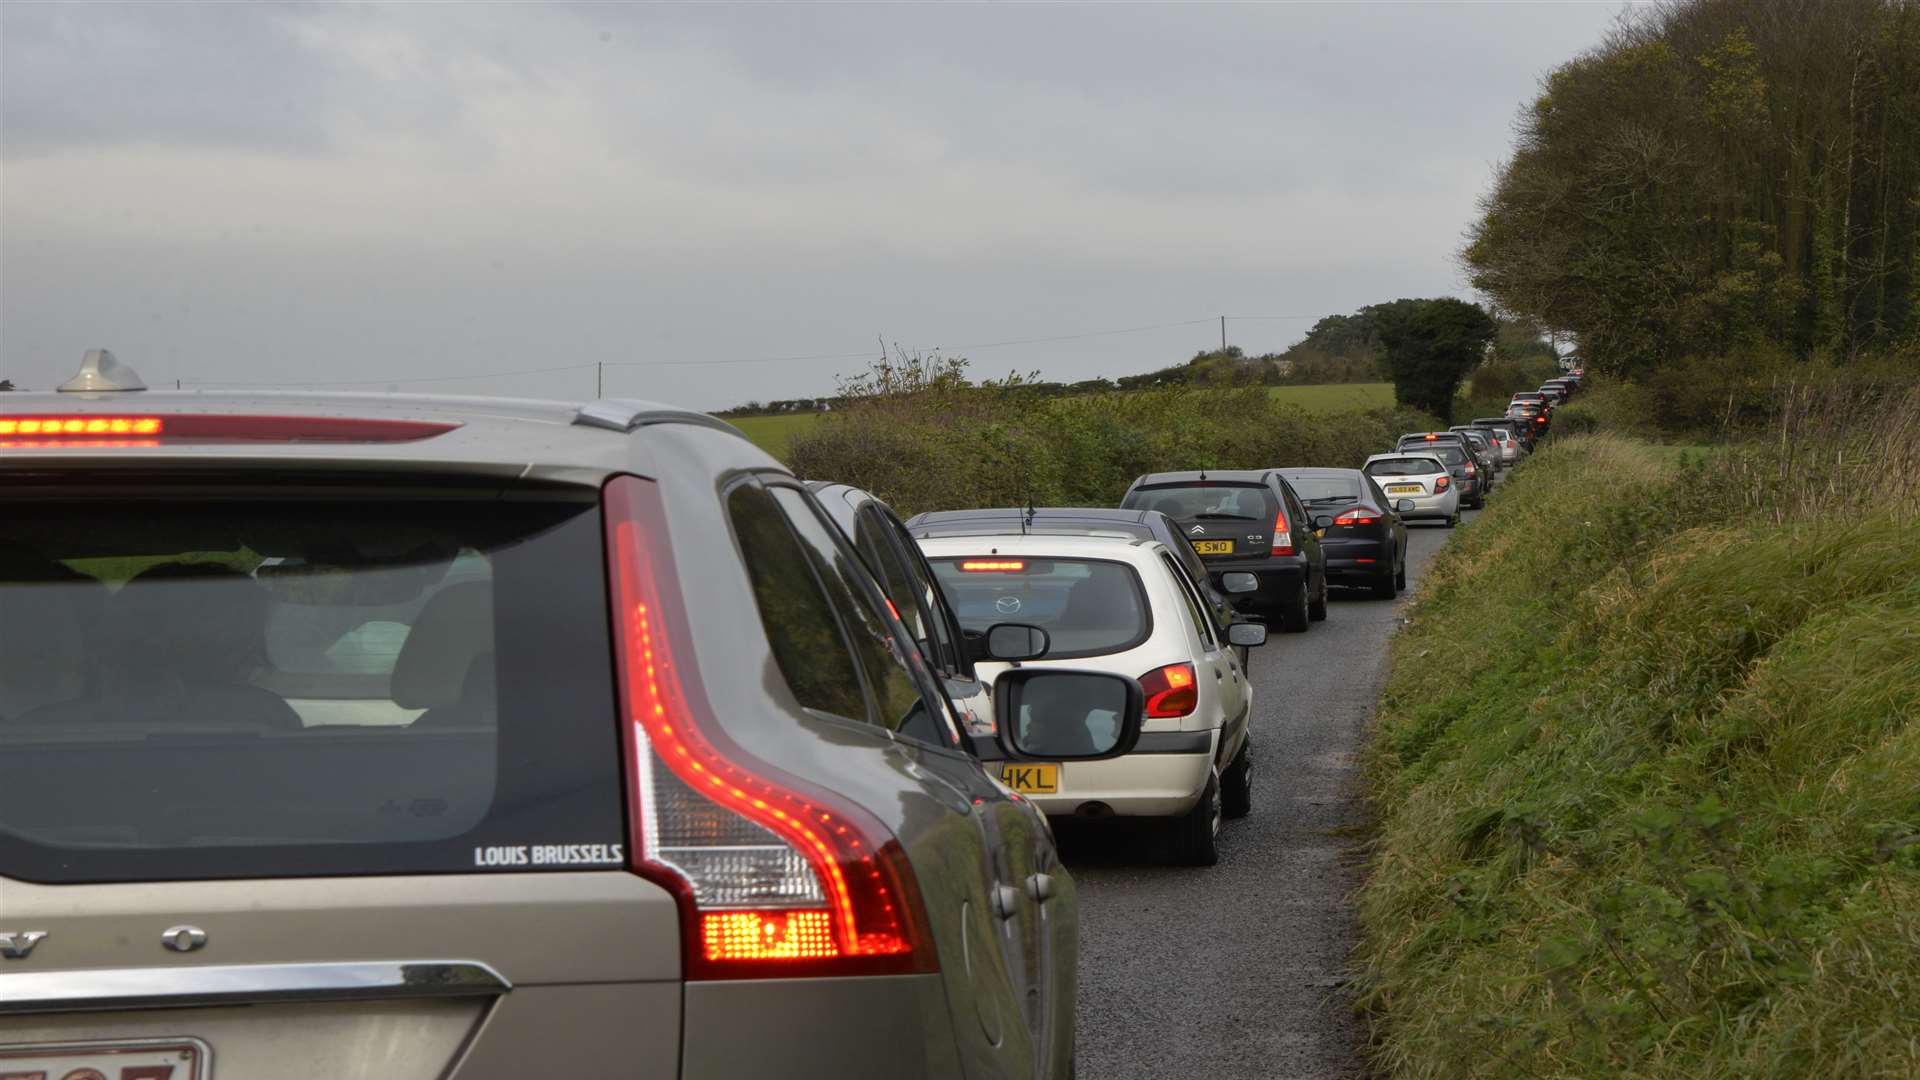 Cars on the road contribute to the nitrogen dioxide emissions